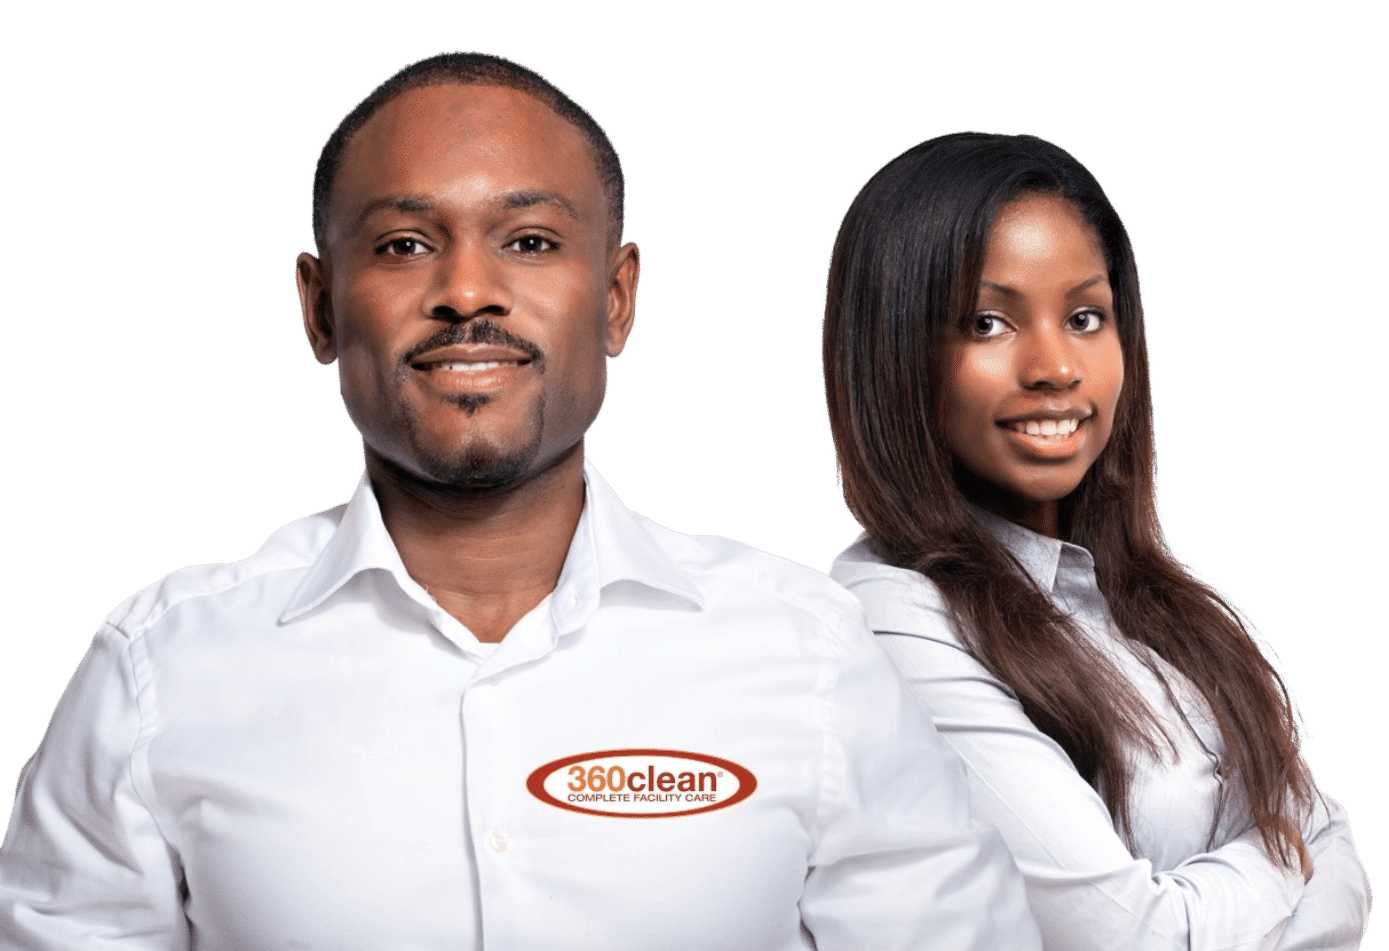 Logoed employees for 360clean's commercial cleaning services in Birmingham, Alabaama depicted